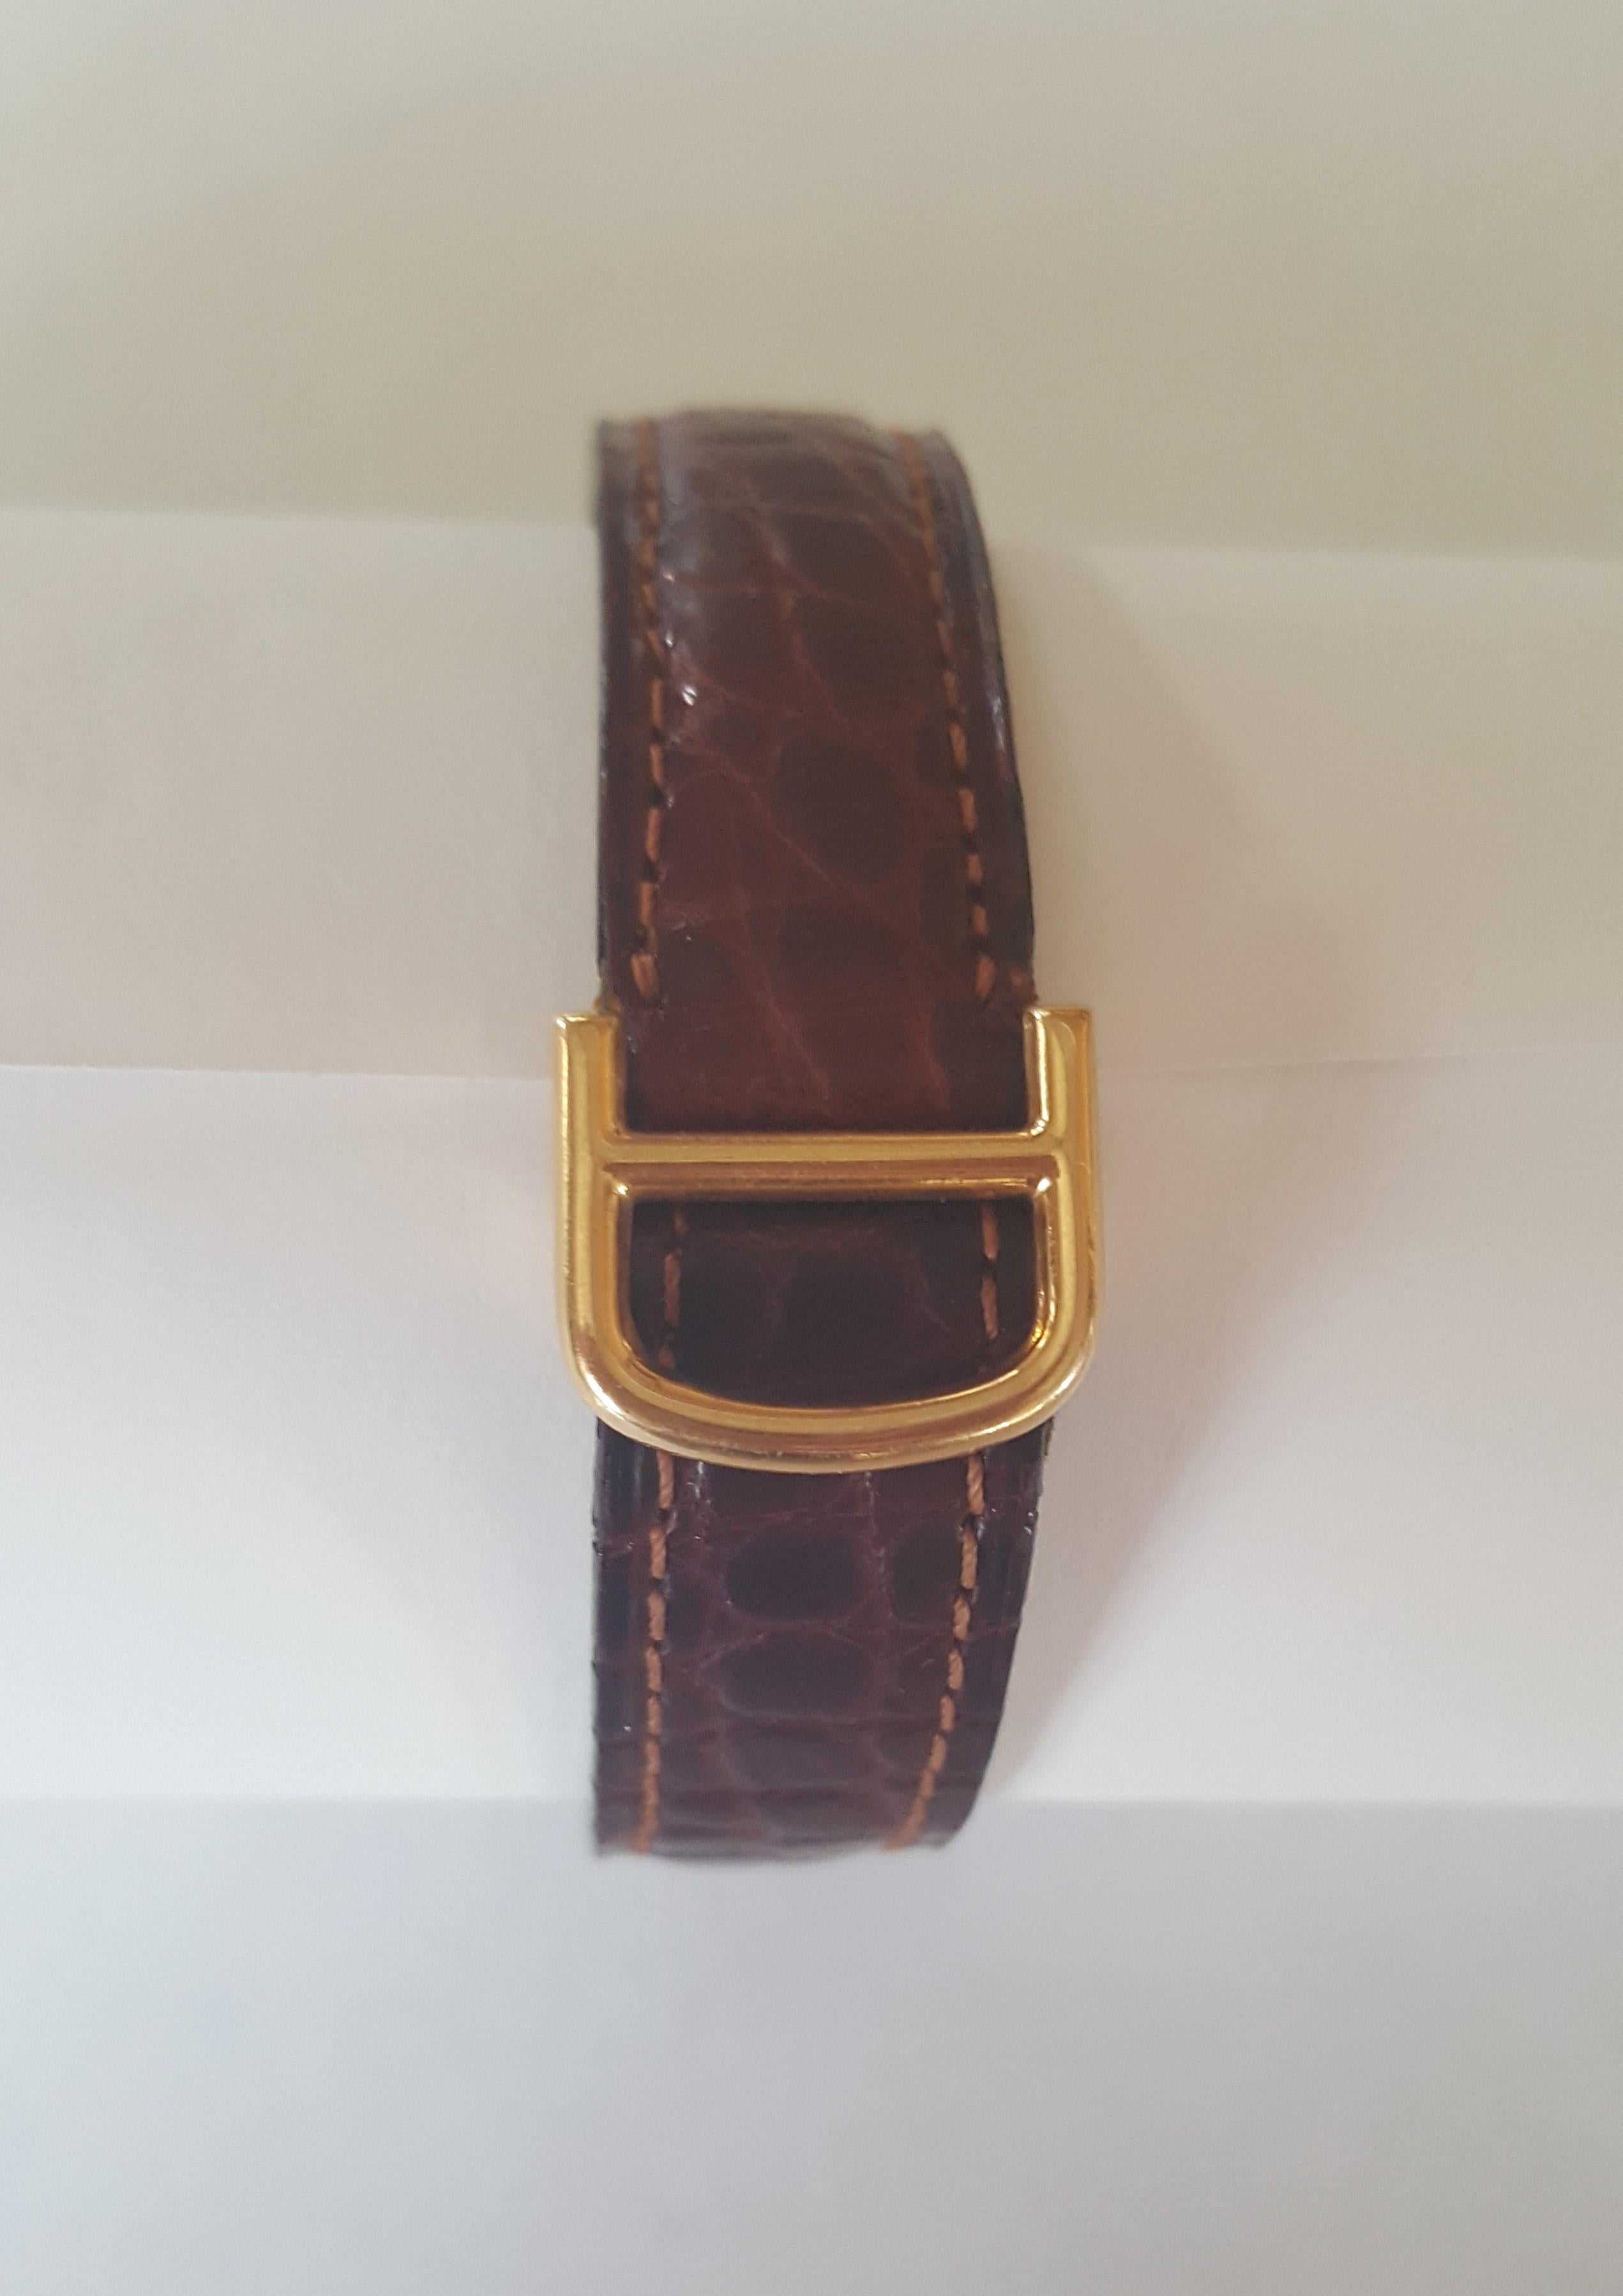 Solid 18kt Yellow Gold Cartier Tank Watch, 031795, France, Leather, 17 Jewel.  The watch has been oiled, cleaned and in working condition. Very good condition, white face, black roman numerals. Blue cabochon sapphire crown. Stamped 18kt Cartier,